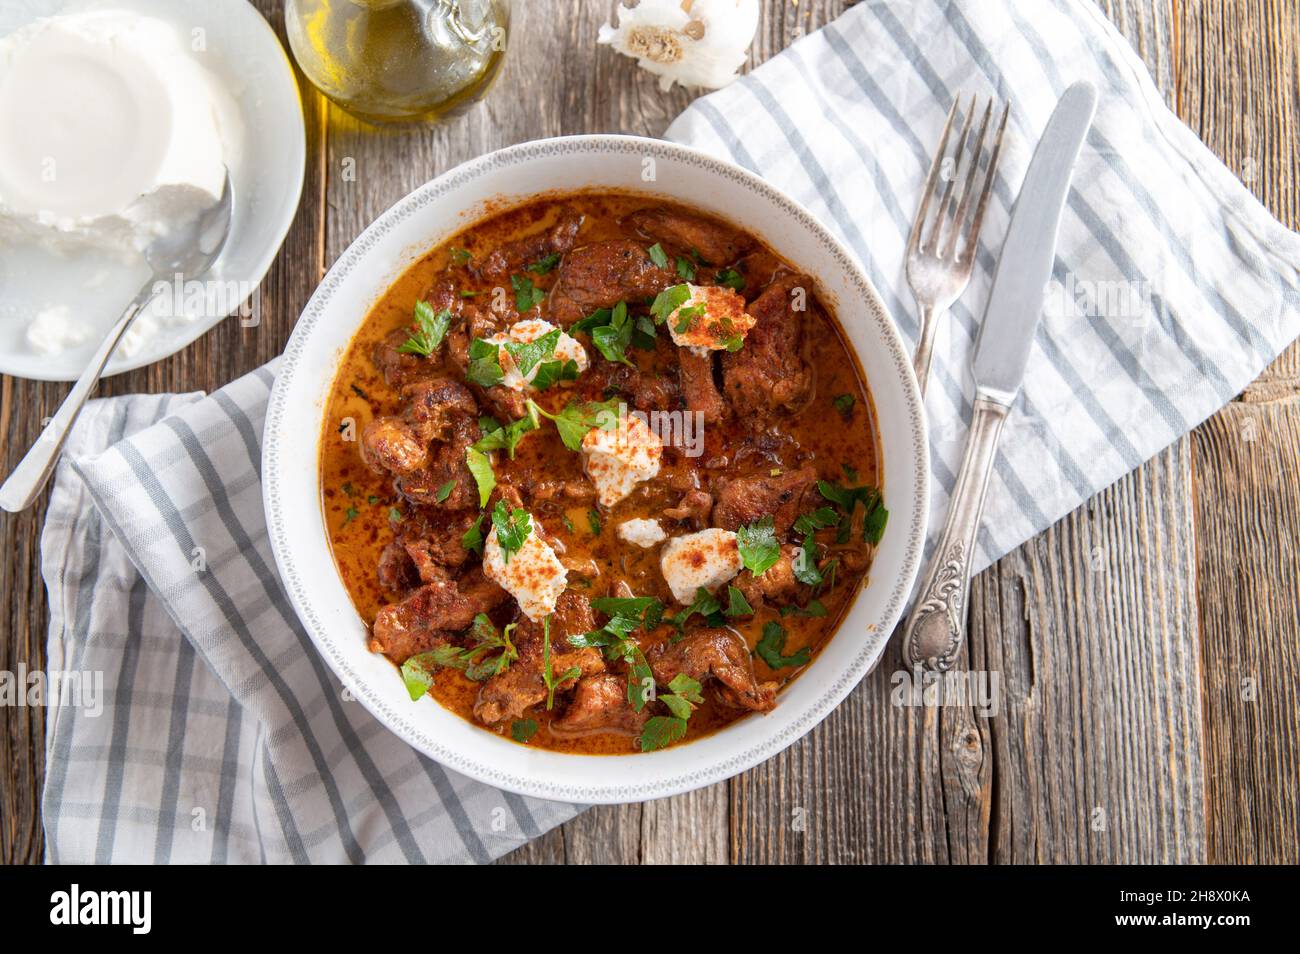 Goulash or ragout in a delicious paprika cream sauce with ricotta topping. Stock Photo